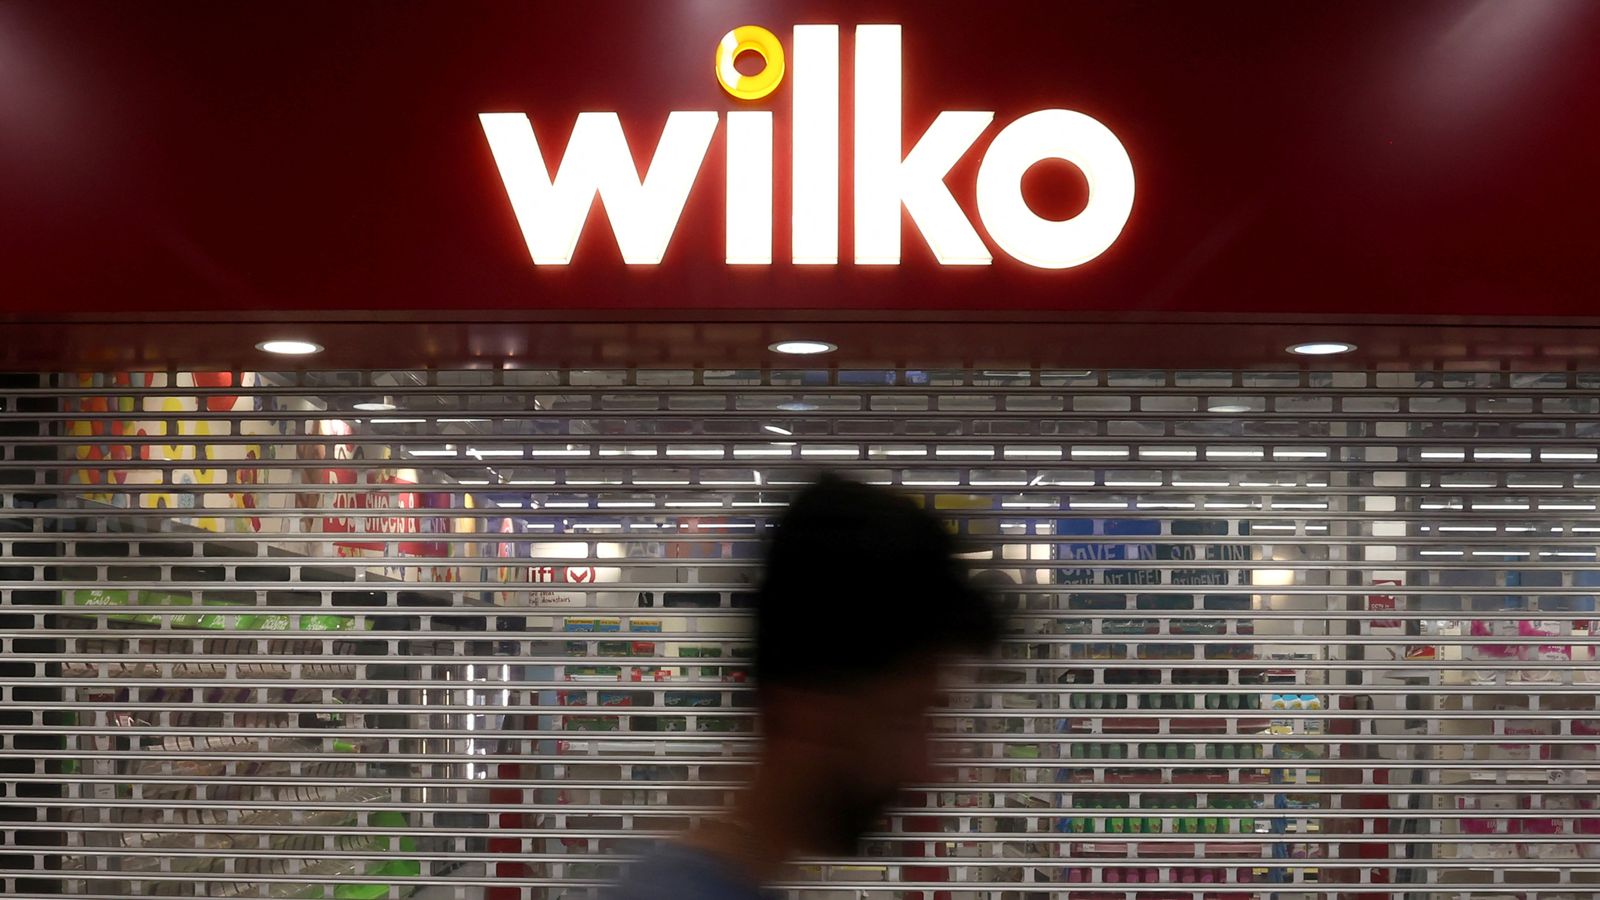 Wilko: 'Hope' for future of retailer after 'expressions of interest' in parts of business